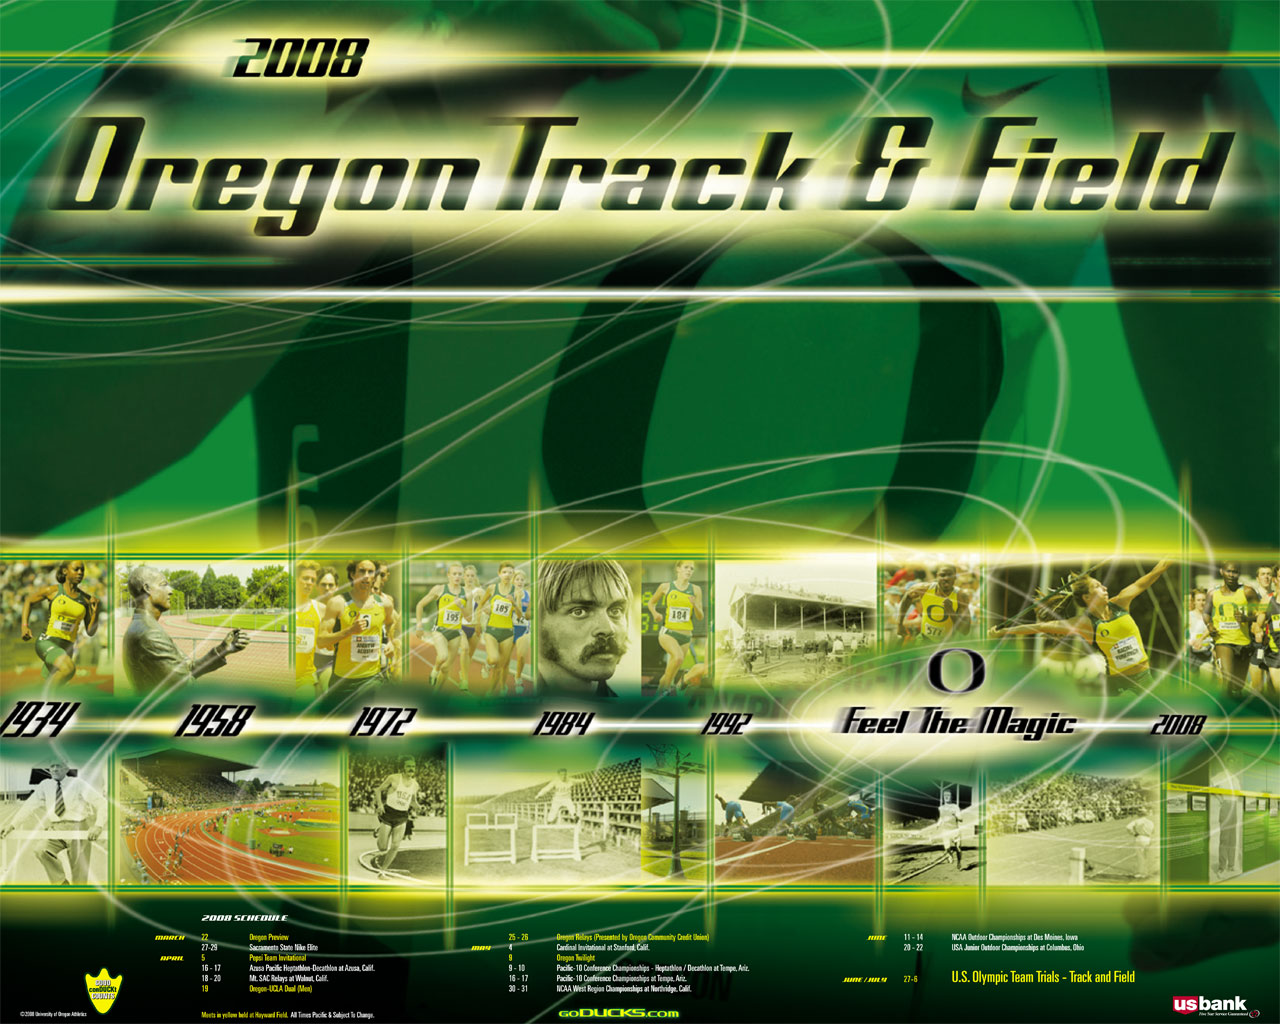 Track And Field Wallpaper Background